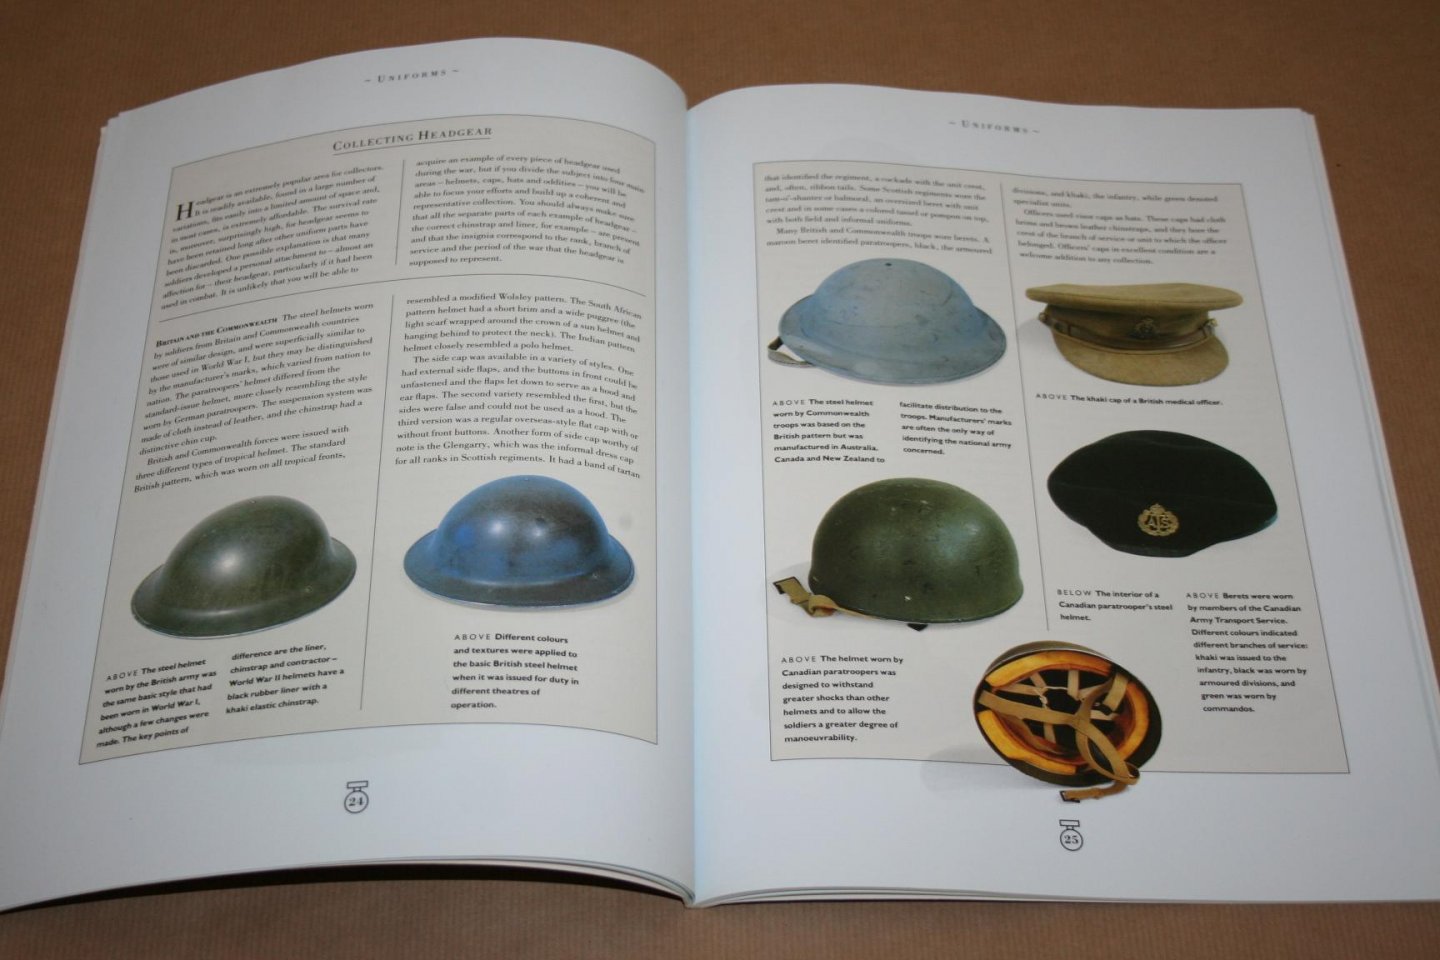 Rinker & Heistand - World War II Collectibles  -- The Collector's Guide to identifying, buying and enjoying World War II Collectibles